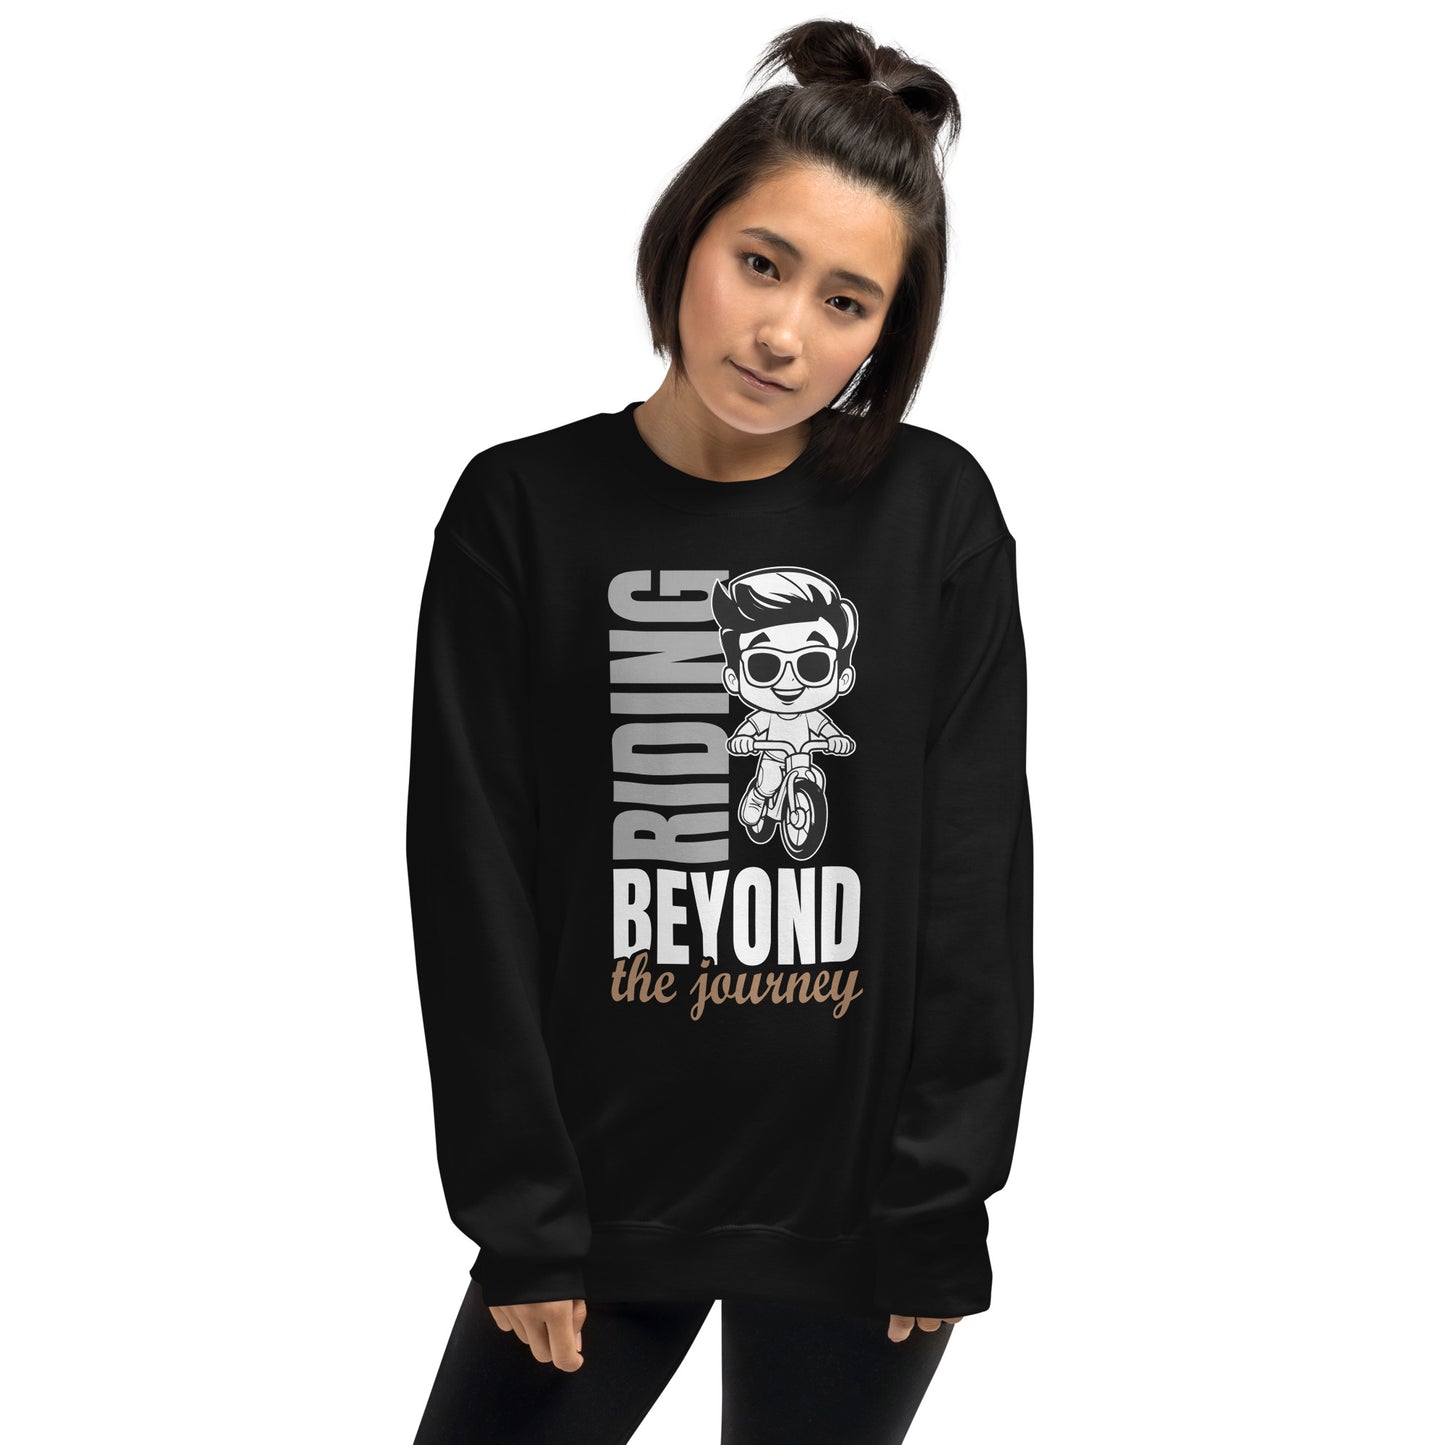 Riding beyond the journey Pullover